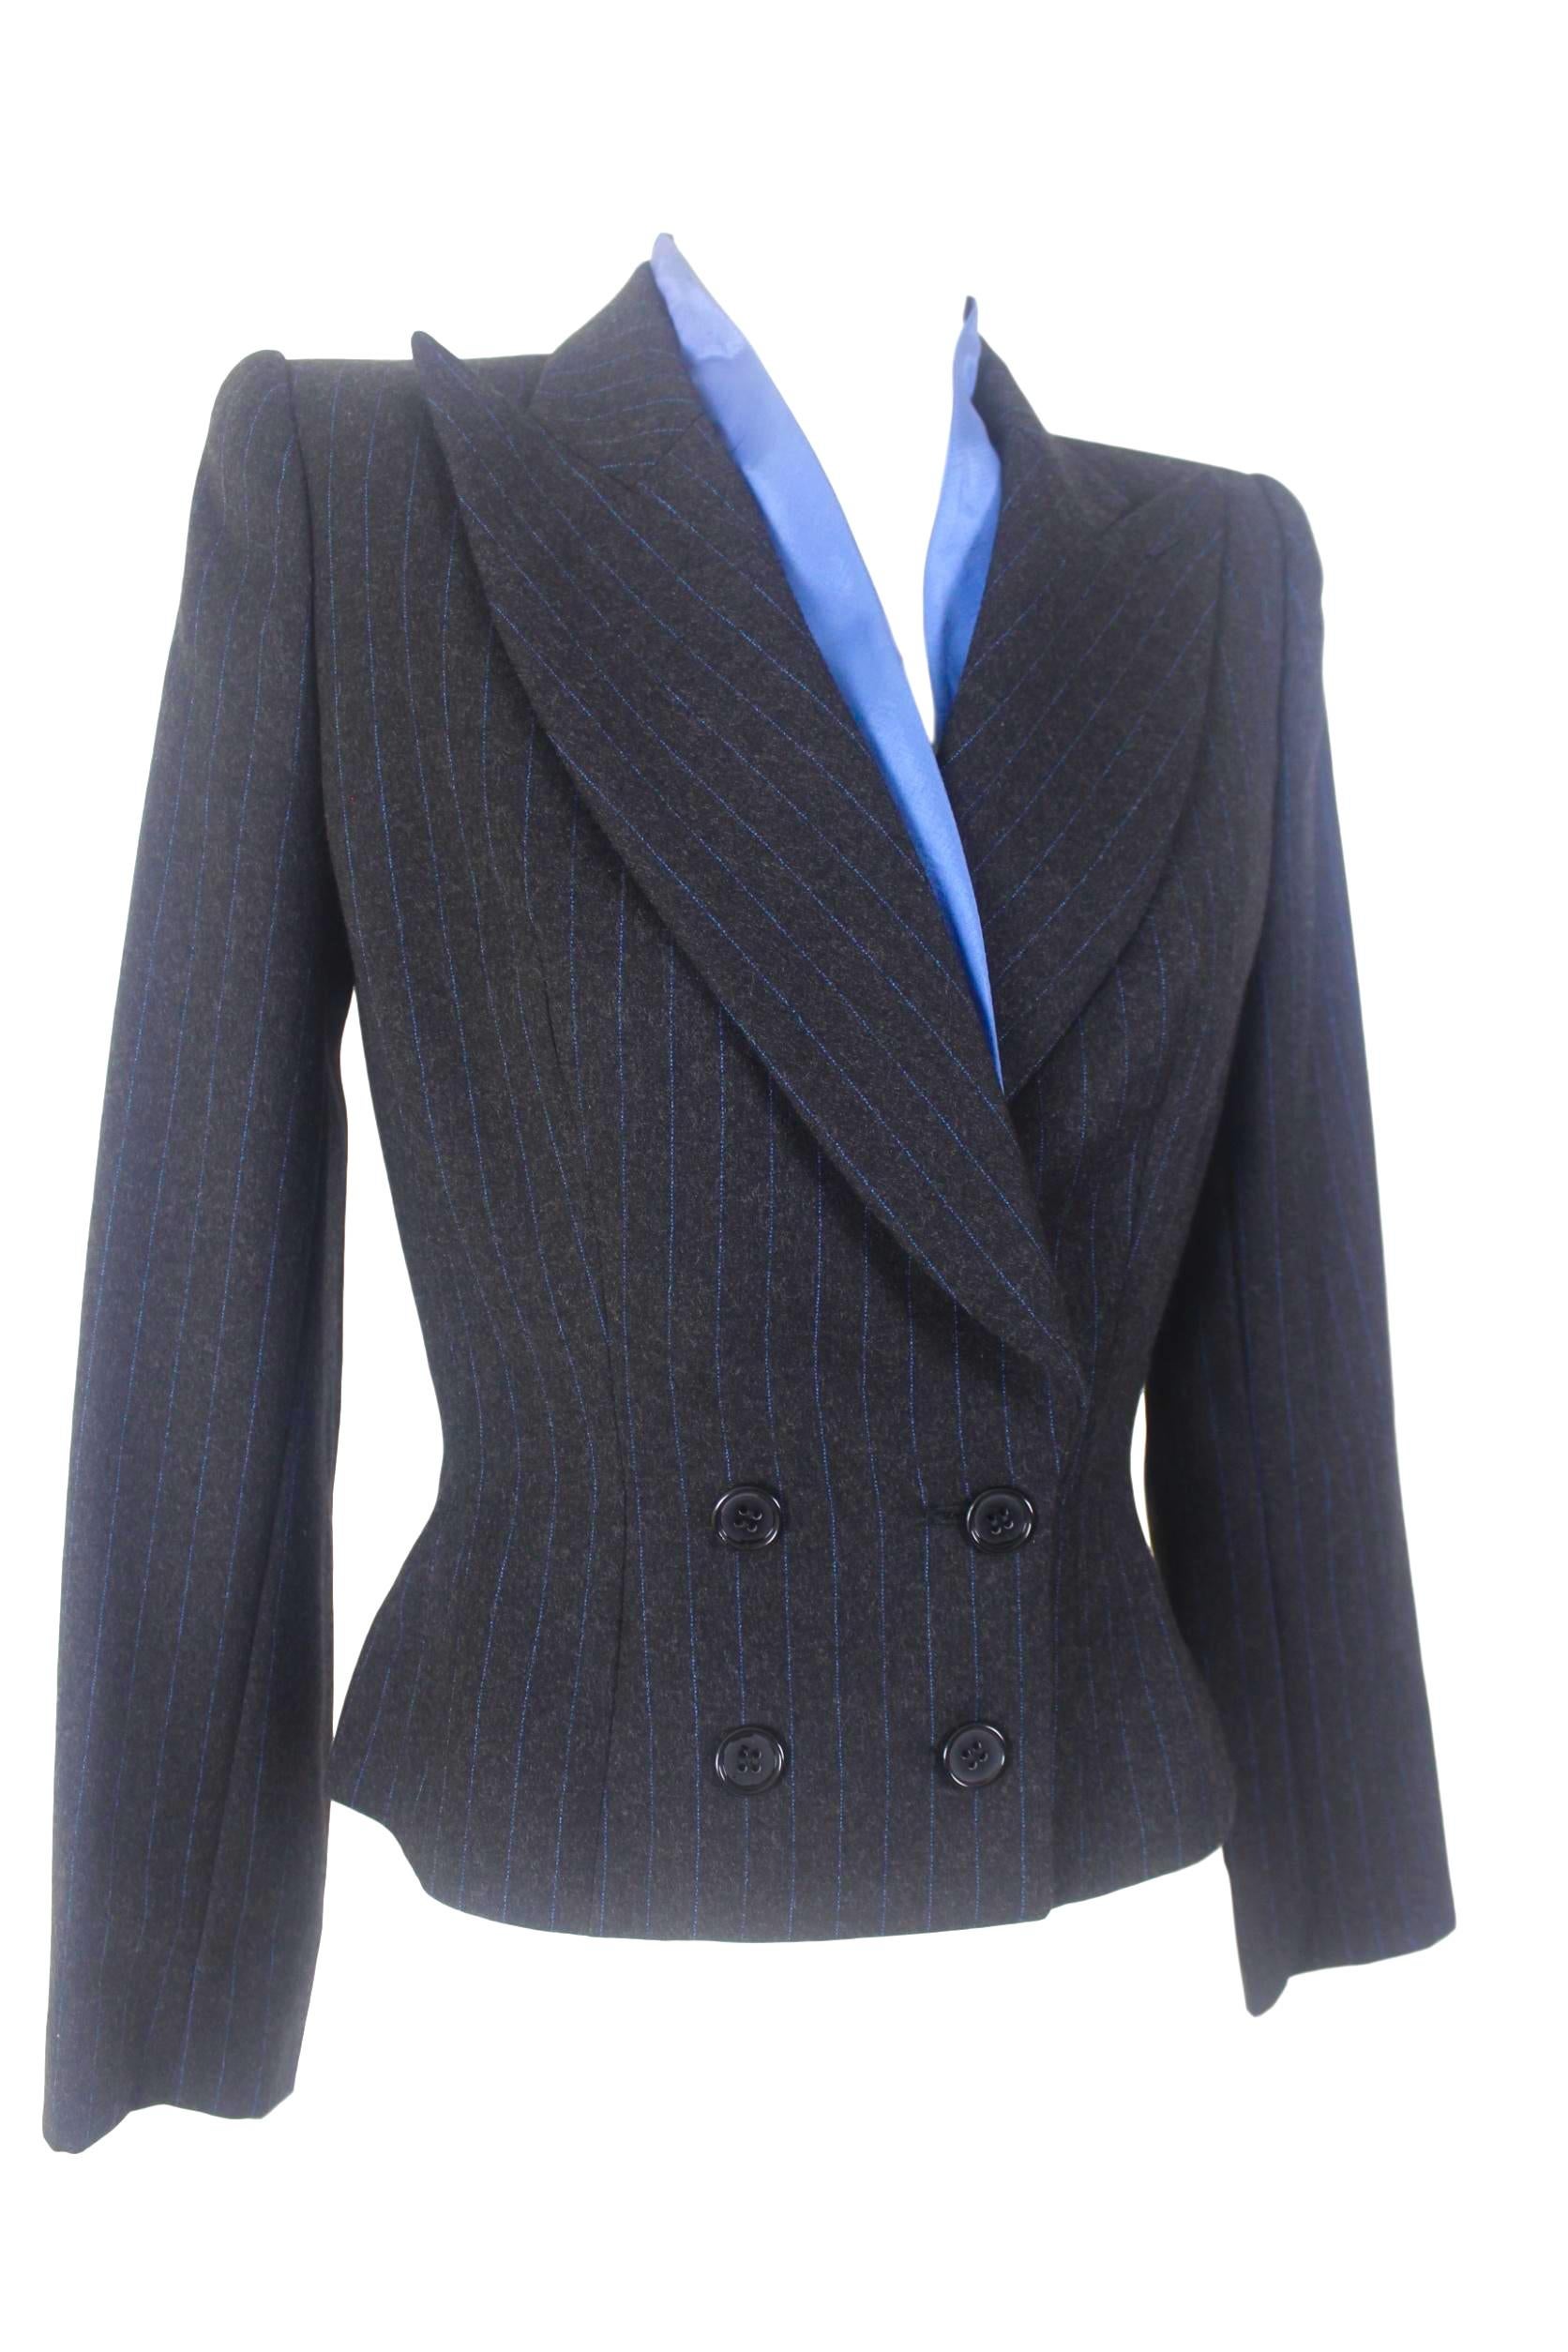 Black Alexander McQueen Pinstripe Blue Satin Lined Suit Fall 1997 Collection